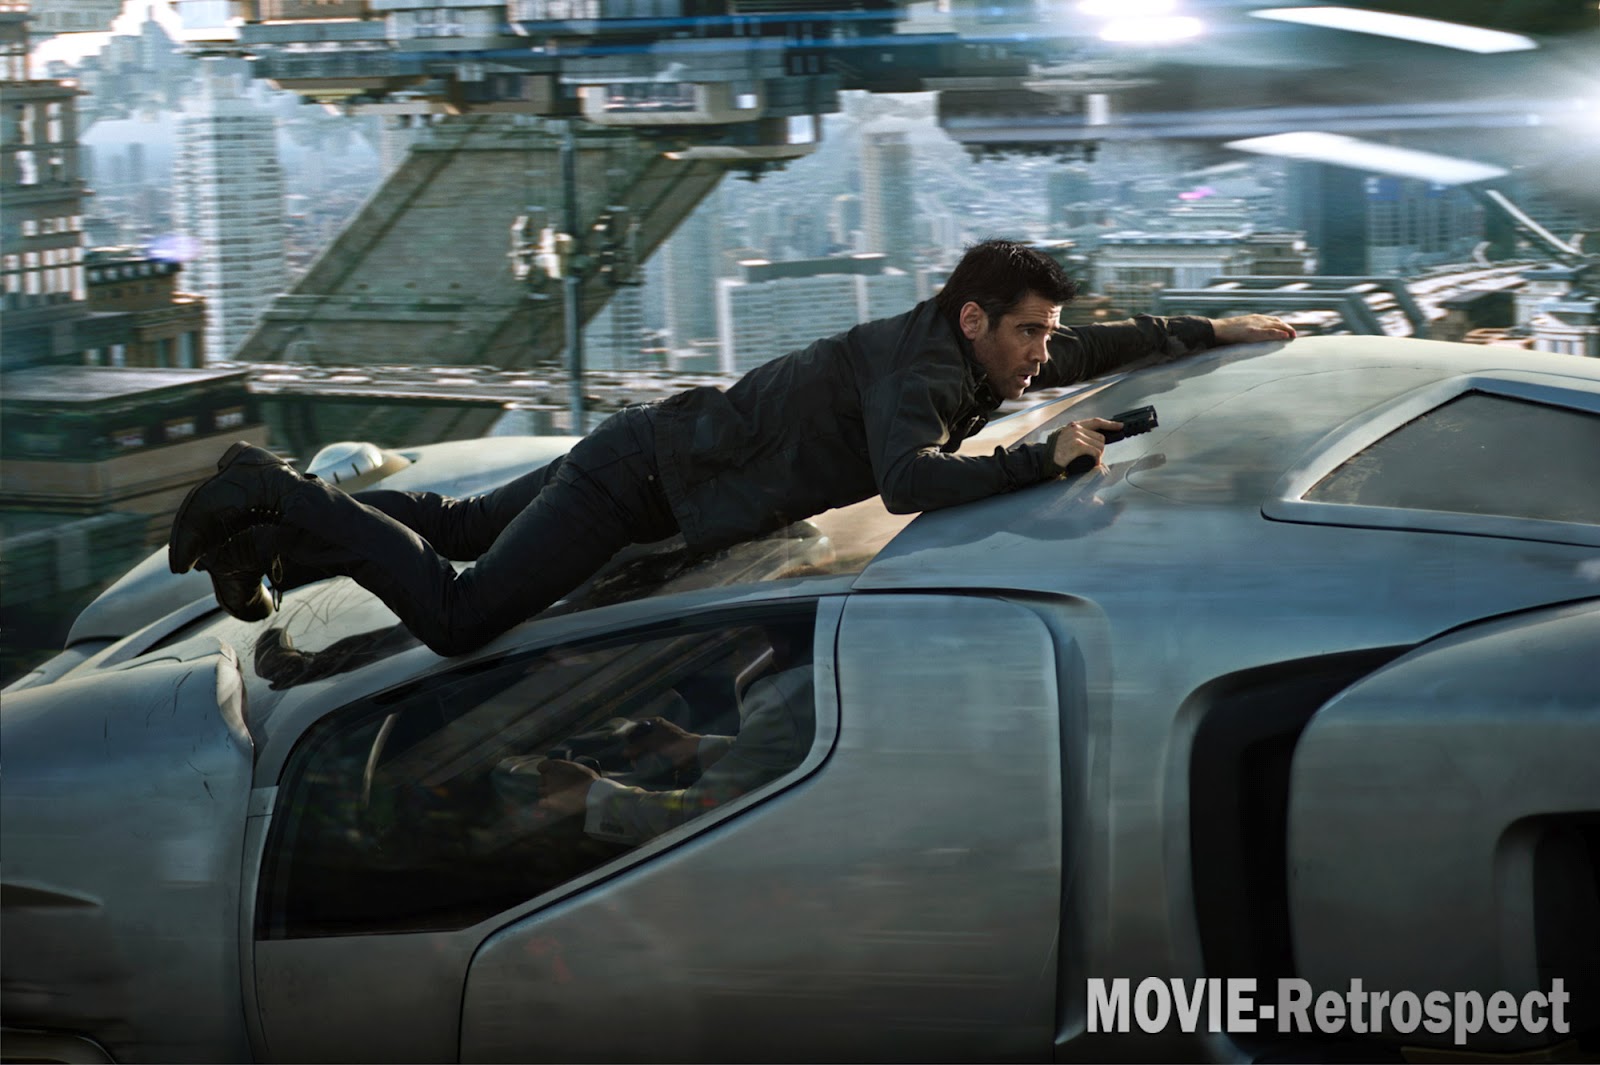 Colin Farrell clings to the front of a flying car Minority Report style in Total Recall